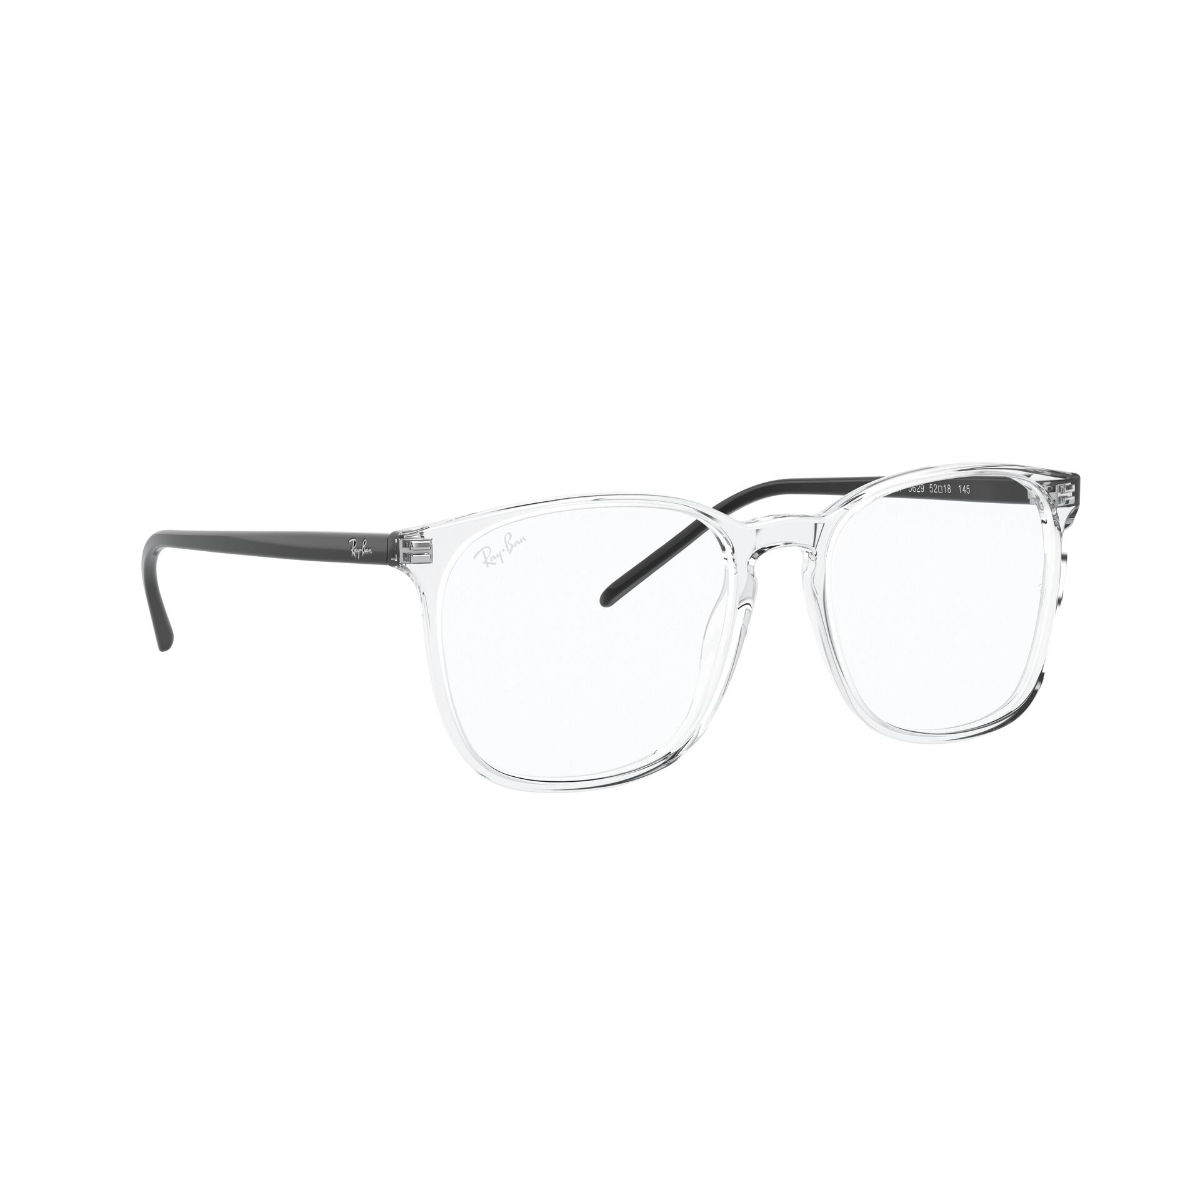 Ray-Ban 0RX5387 Square Unisex Optical Frames (54 mm): Buy Ray-Ban ...